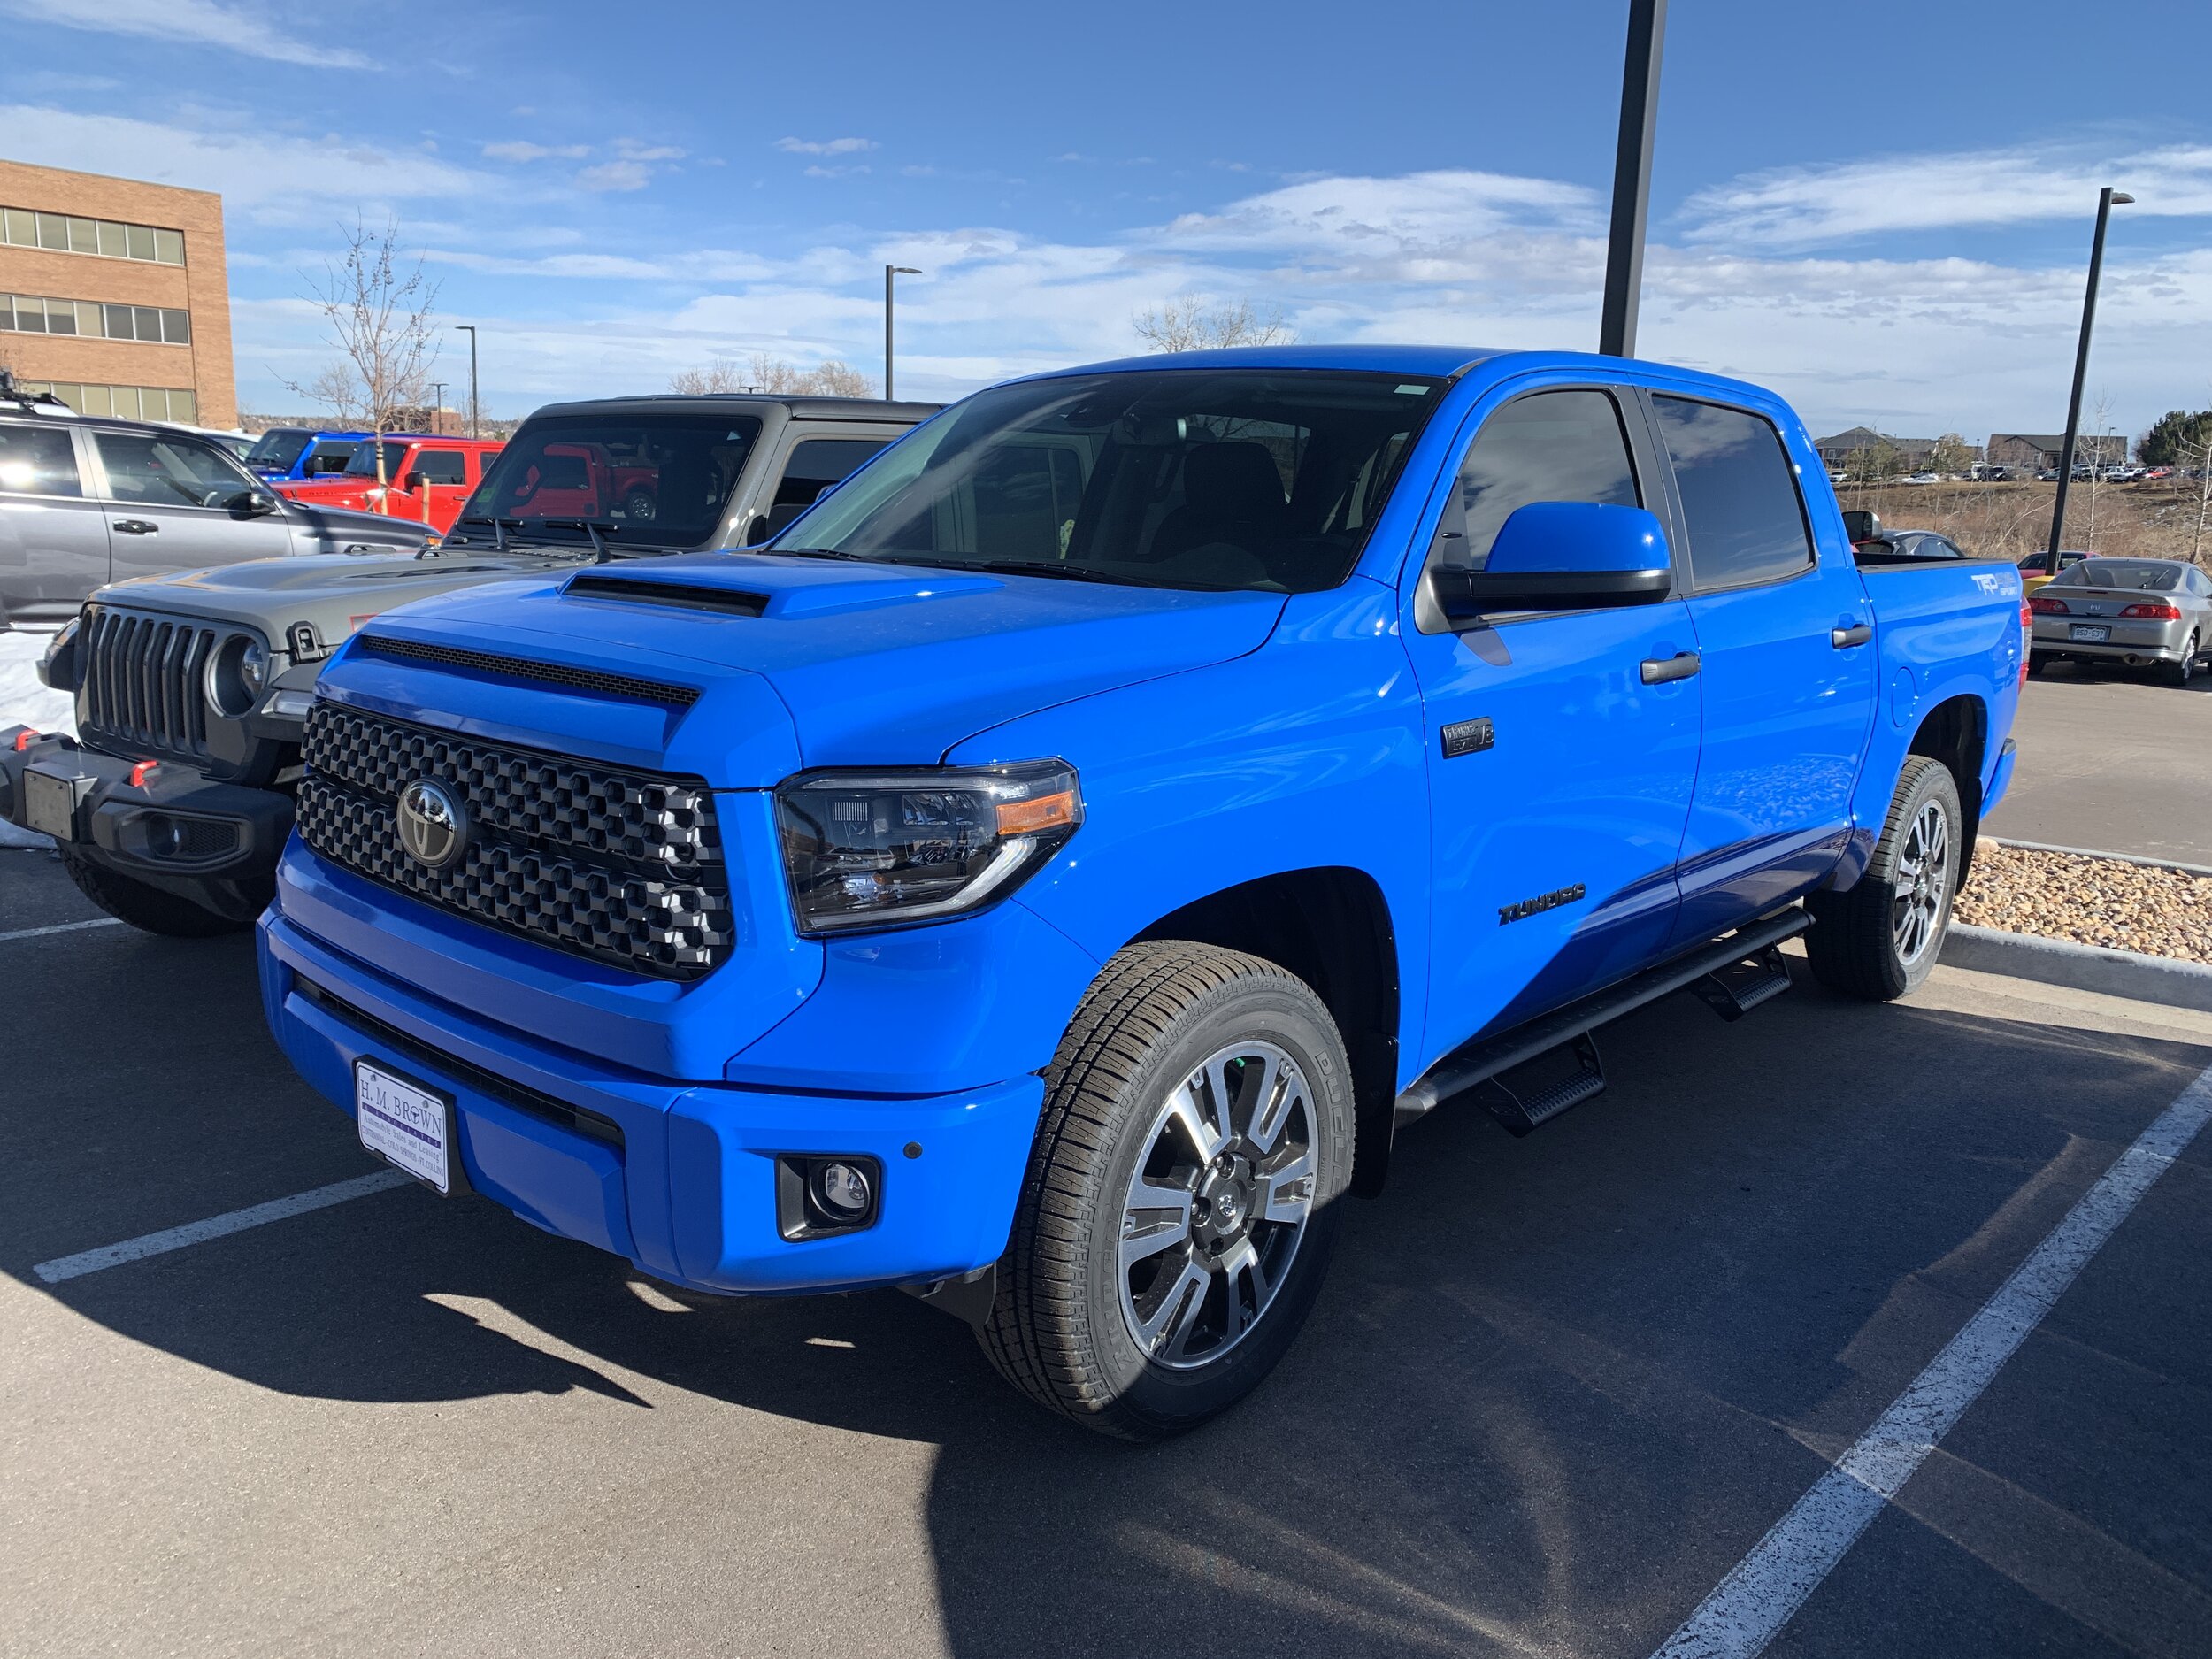 2020 Toyota Tundra Whats New Whats The Best Deal